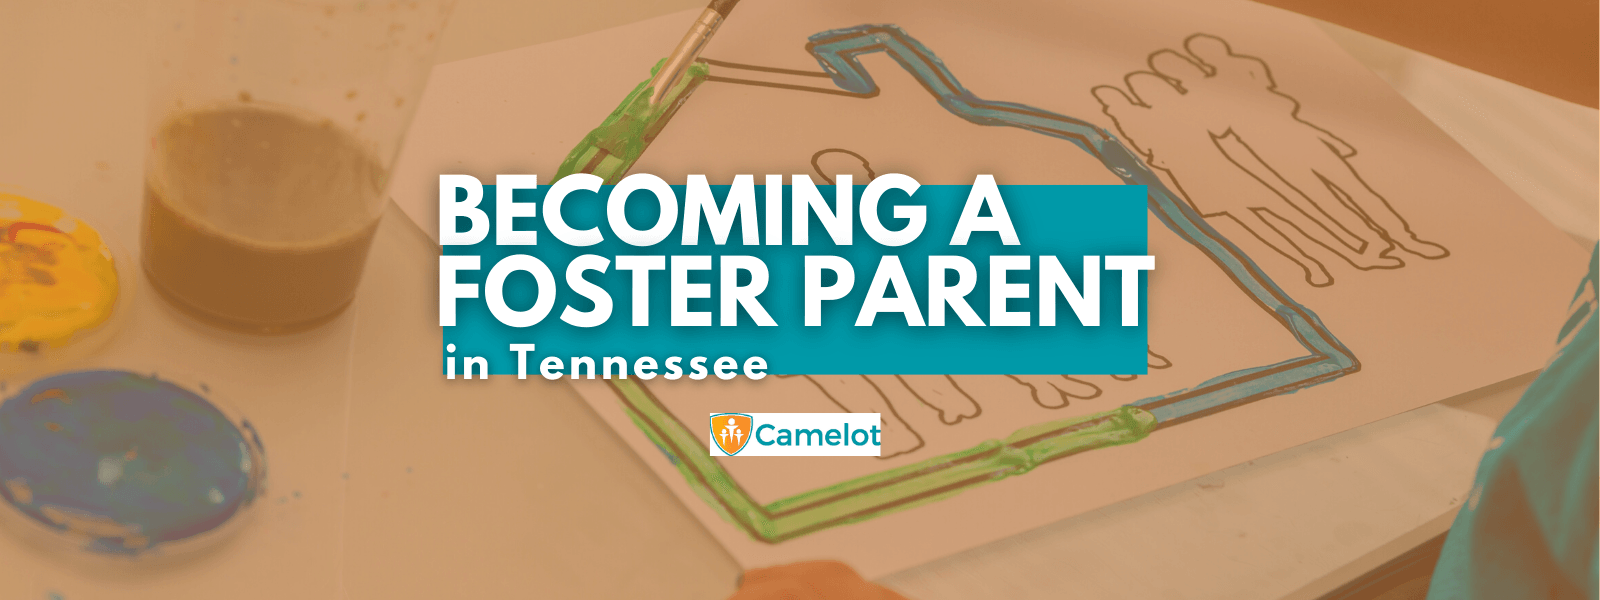 Becoming a Foster Parent in Tennessee Blog Graphic